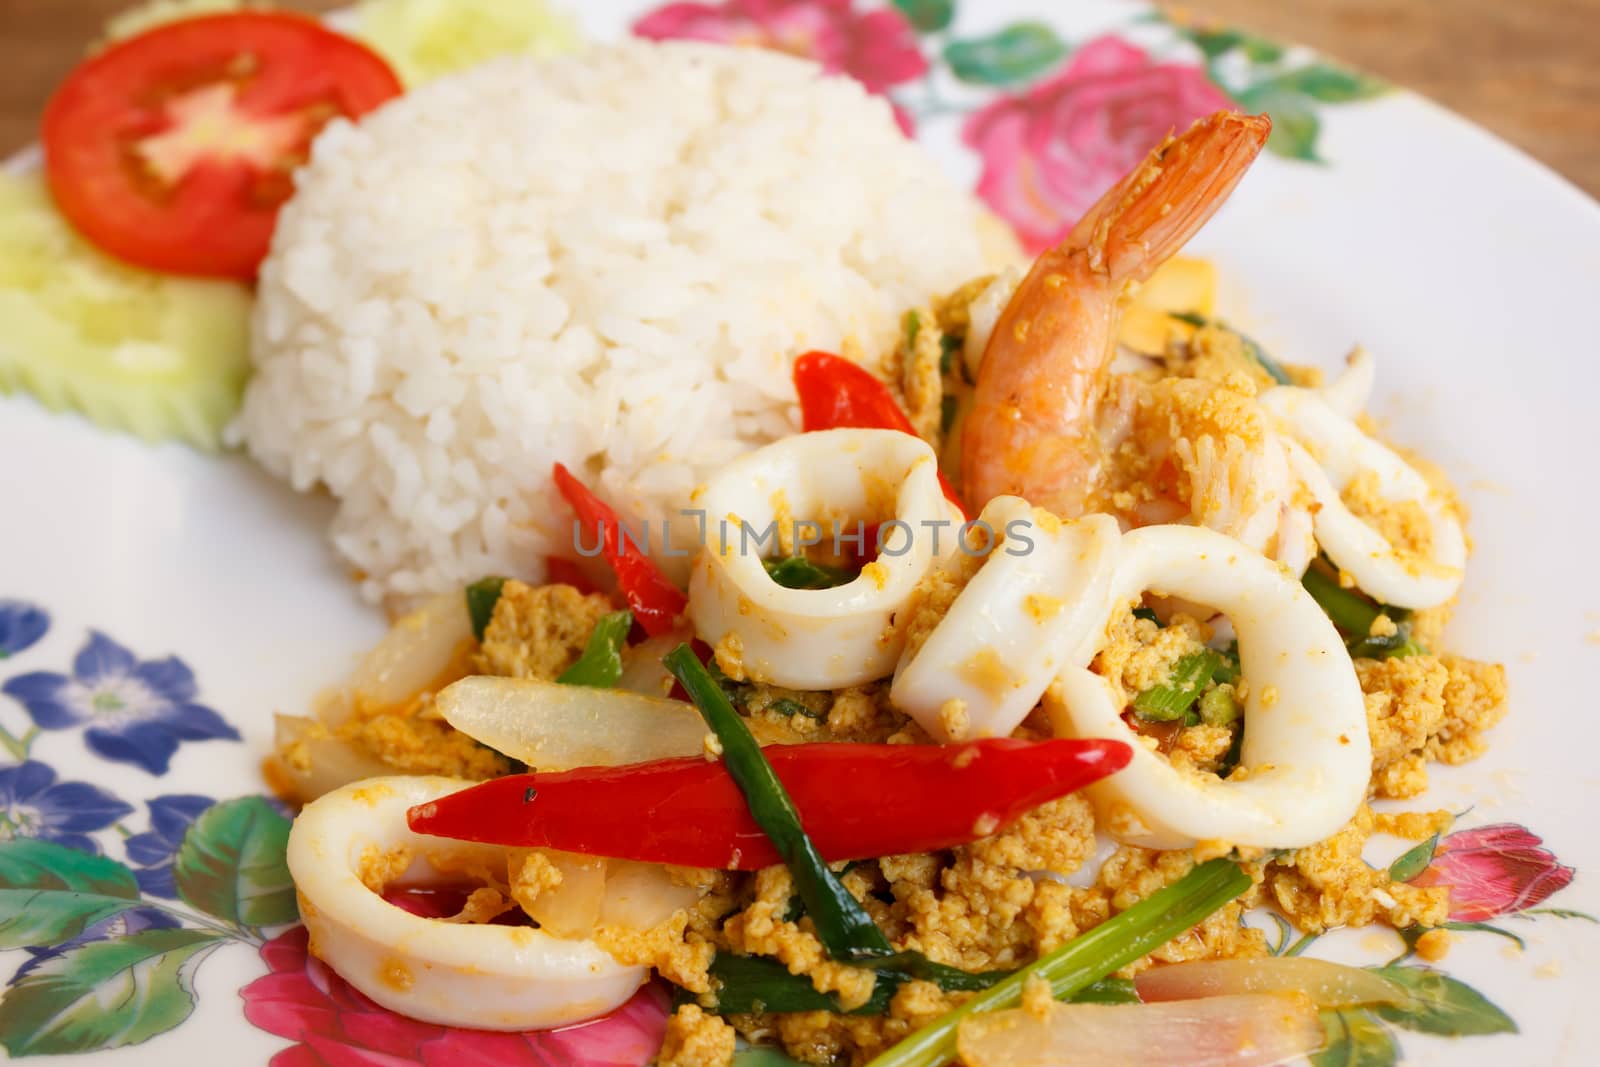  Fried Shrimps with Squid in Curry Powder by vitawin